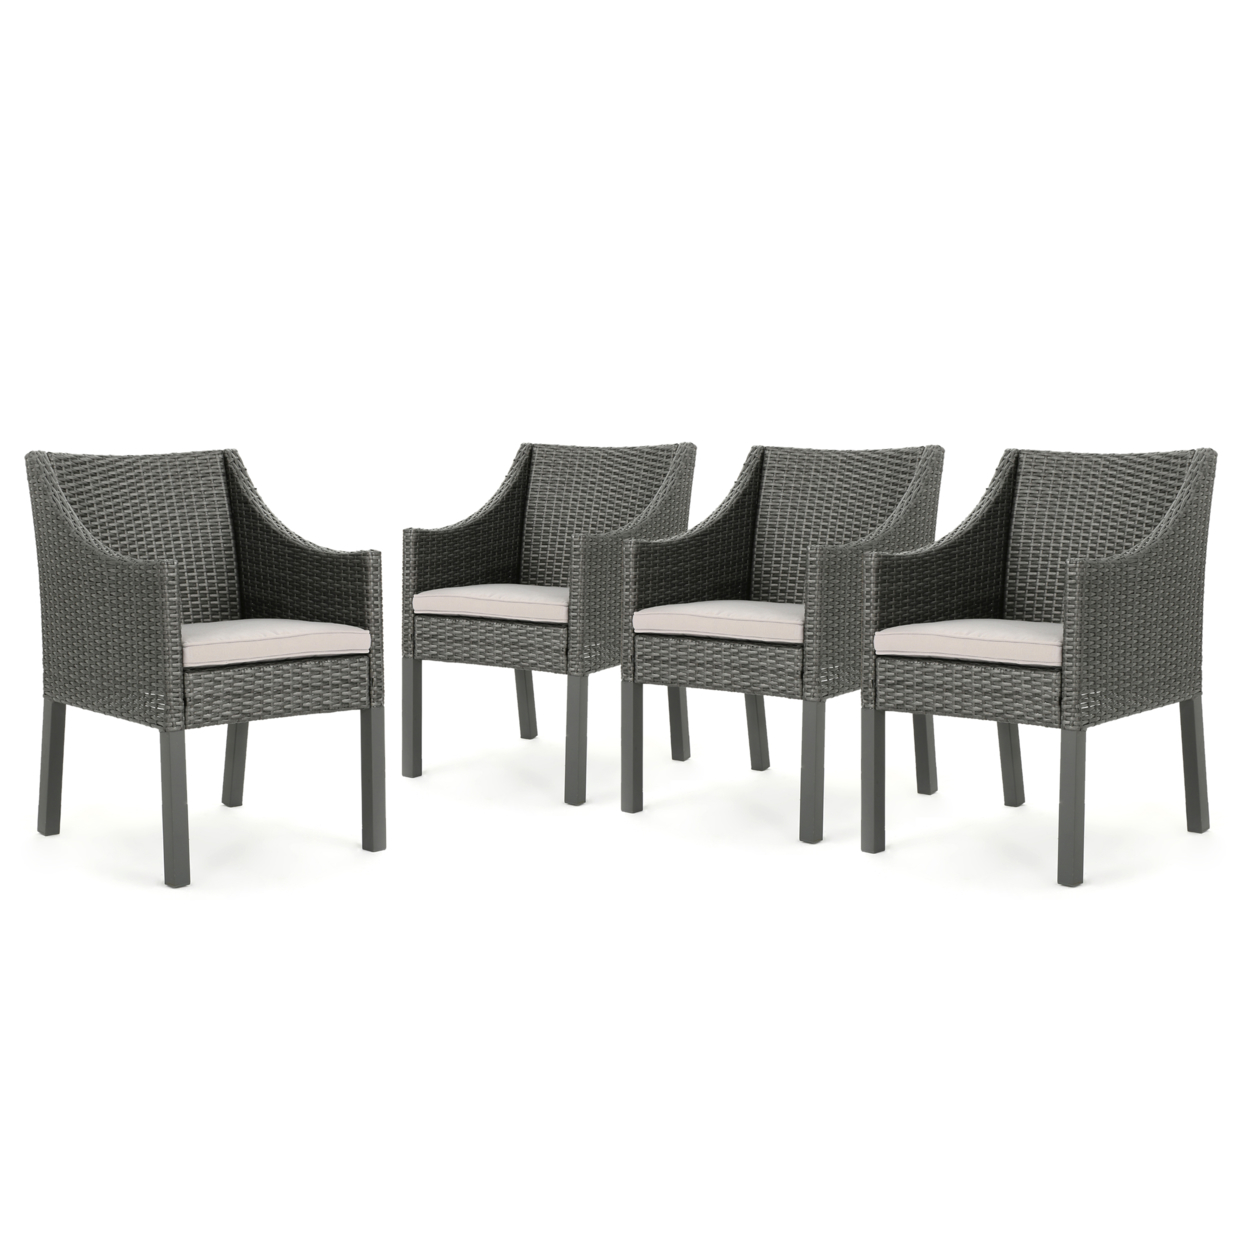 Athena Outdoor Wicker Dining Chairs With Water Resistant Cushions (Set Of 4) - Gray/Silver